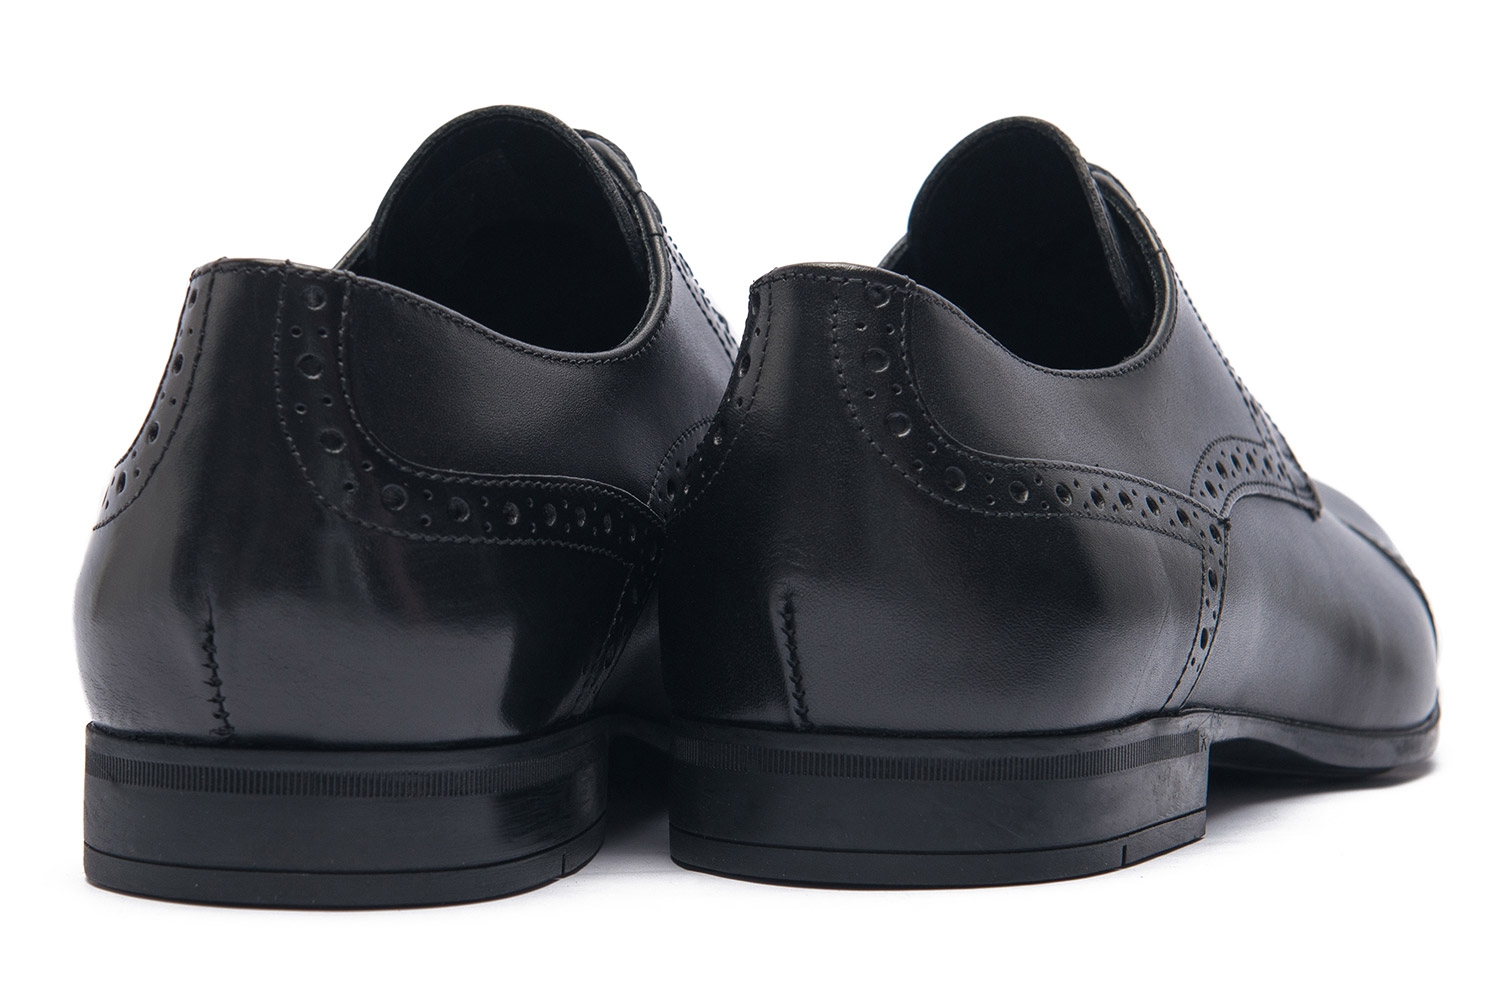 Black genuine leather shoes 2